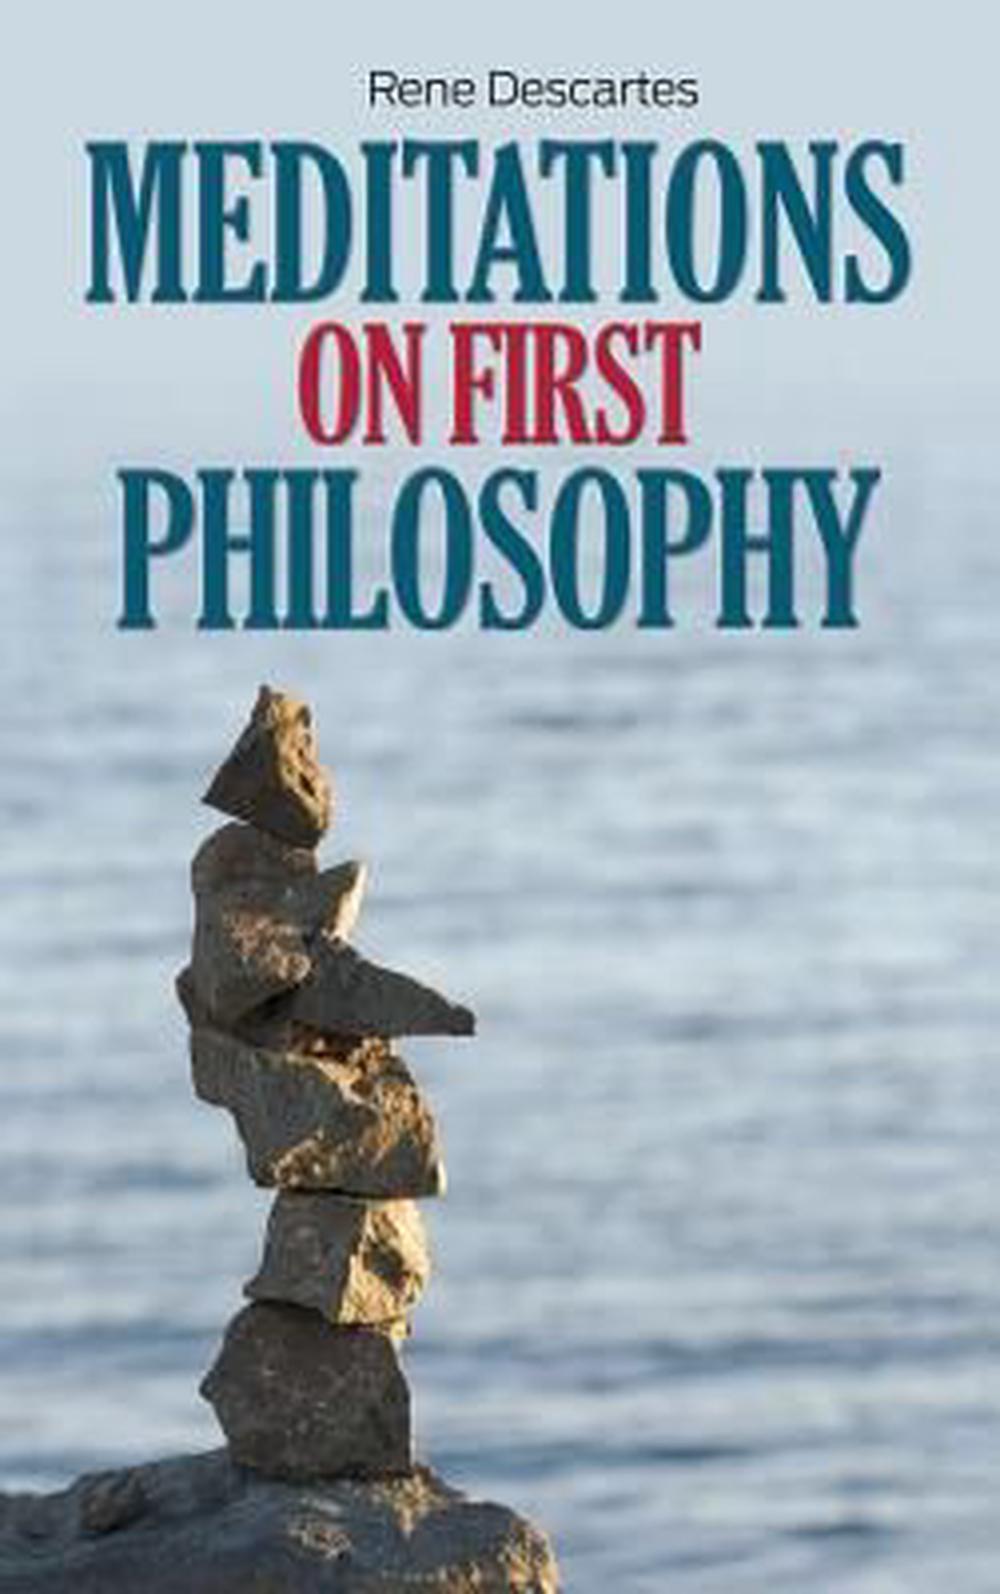 meditations on first philosophy by rené descartes